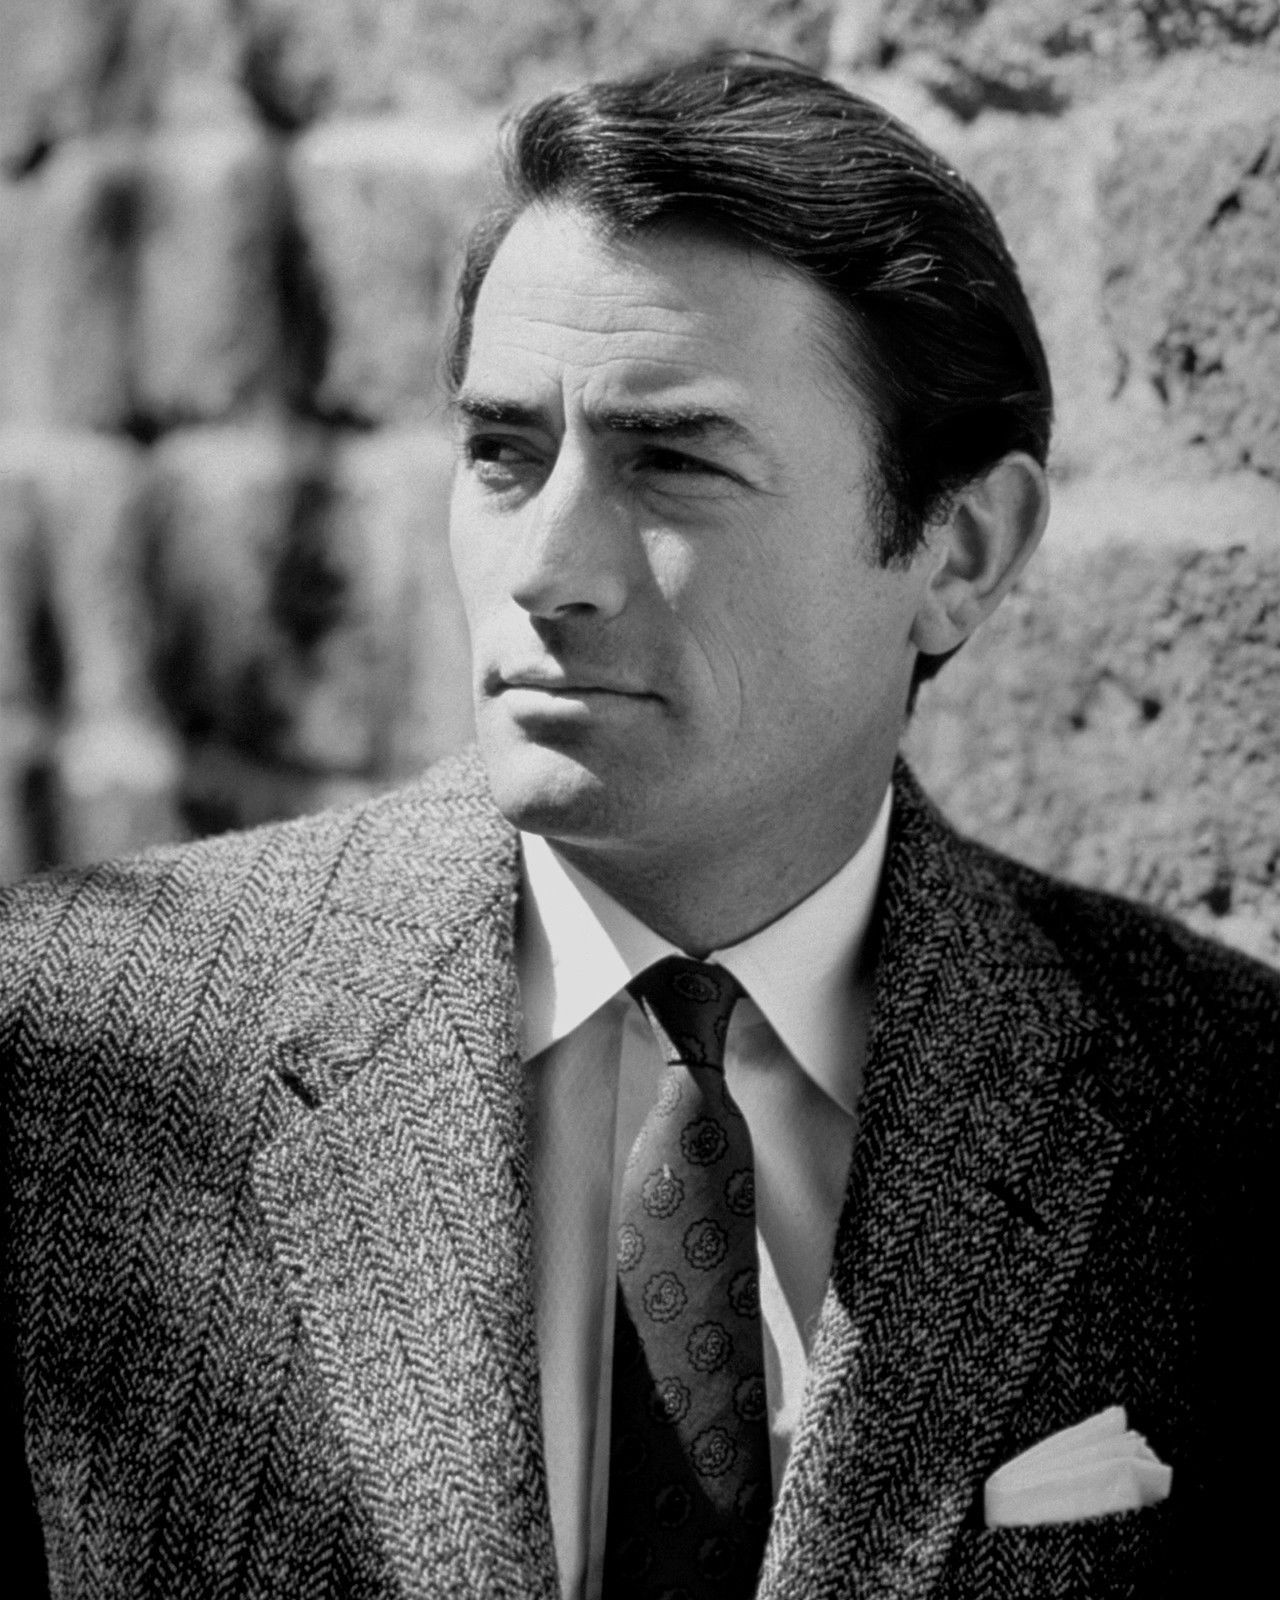 Publicity Photo of American film actor Gregory Peck | Photo: Public Domain, Wikimedia Commons